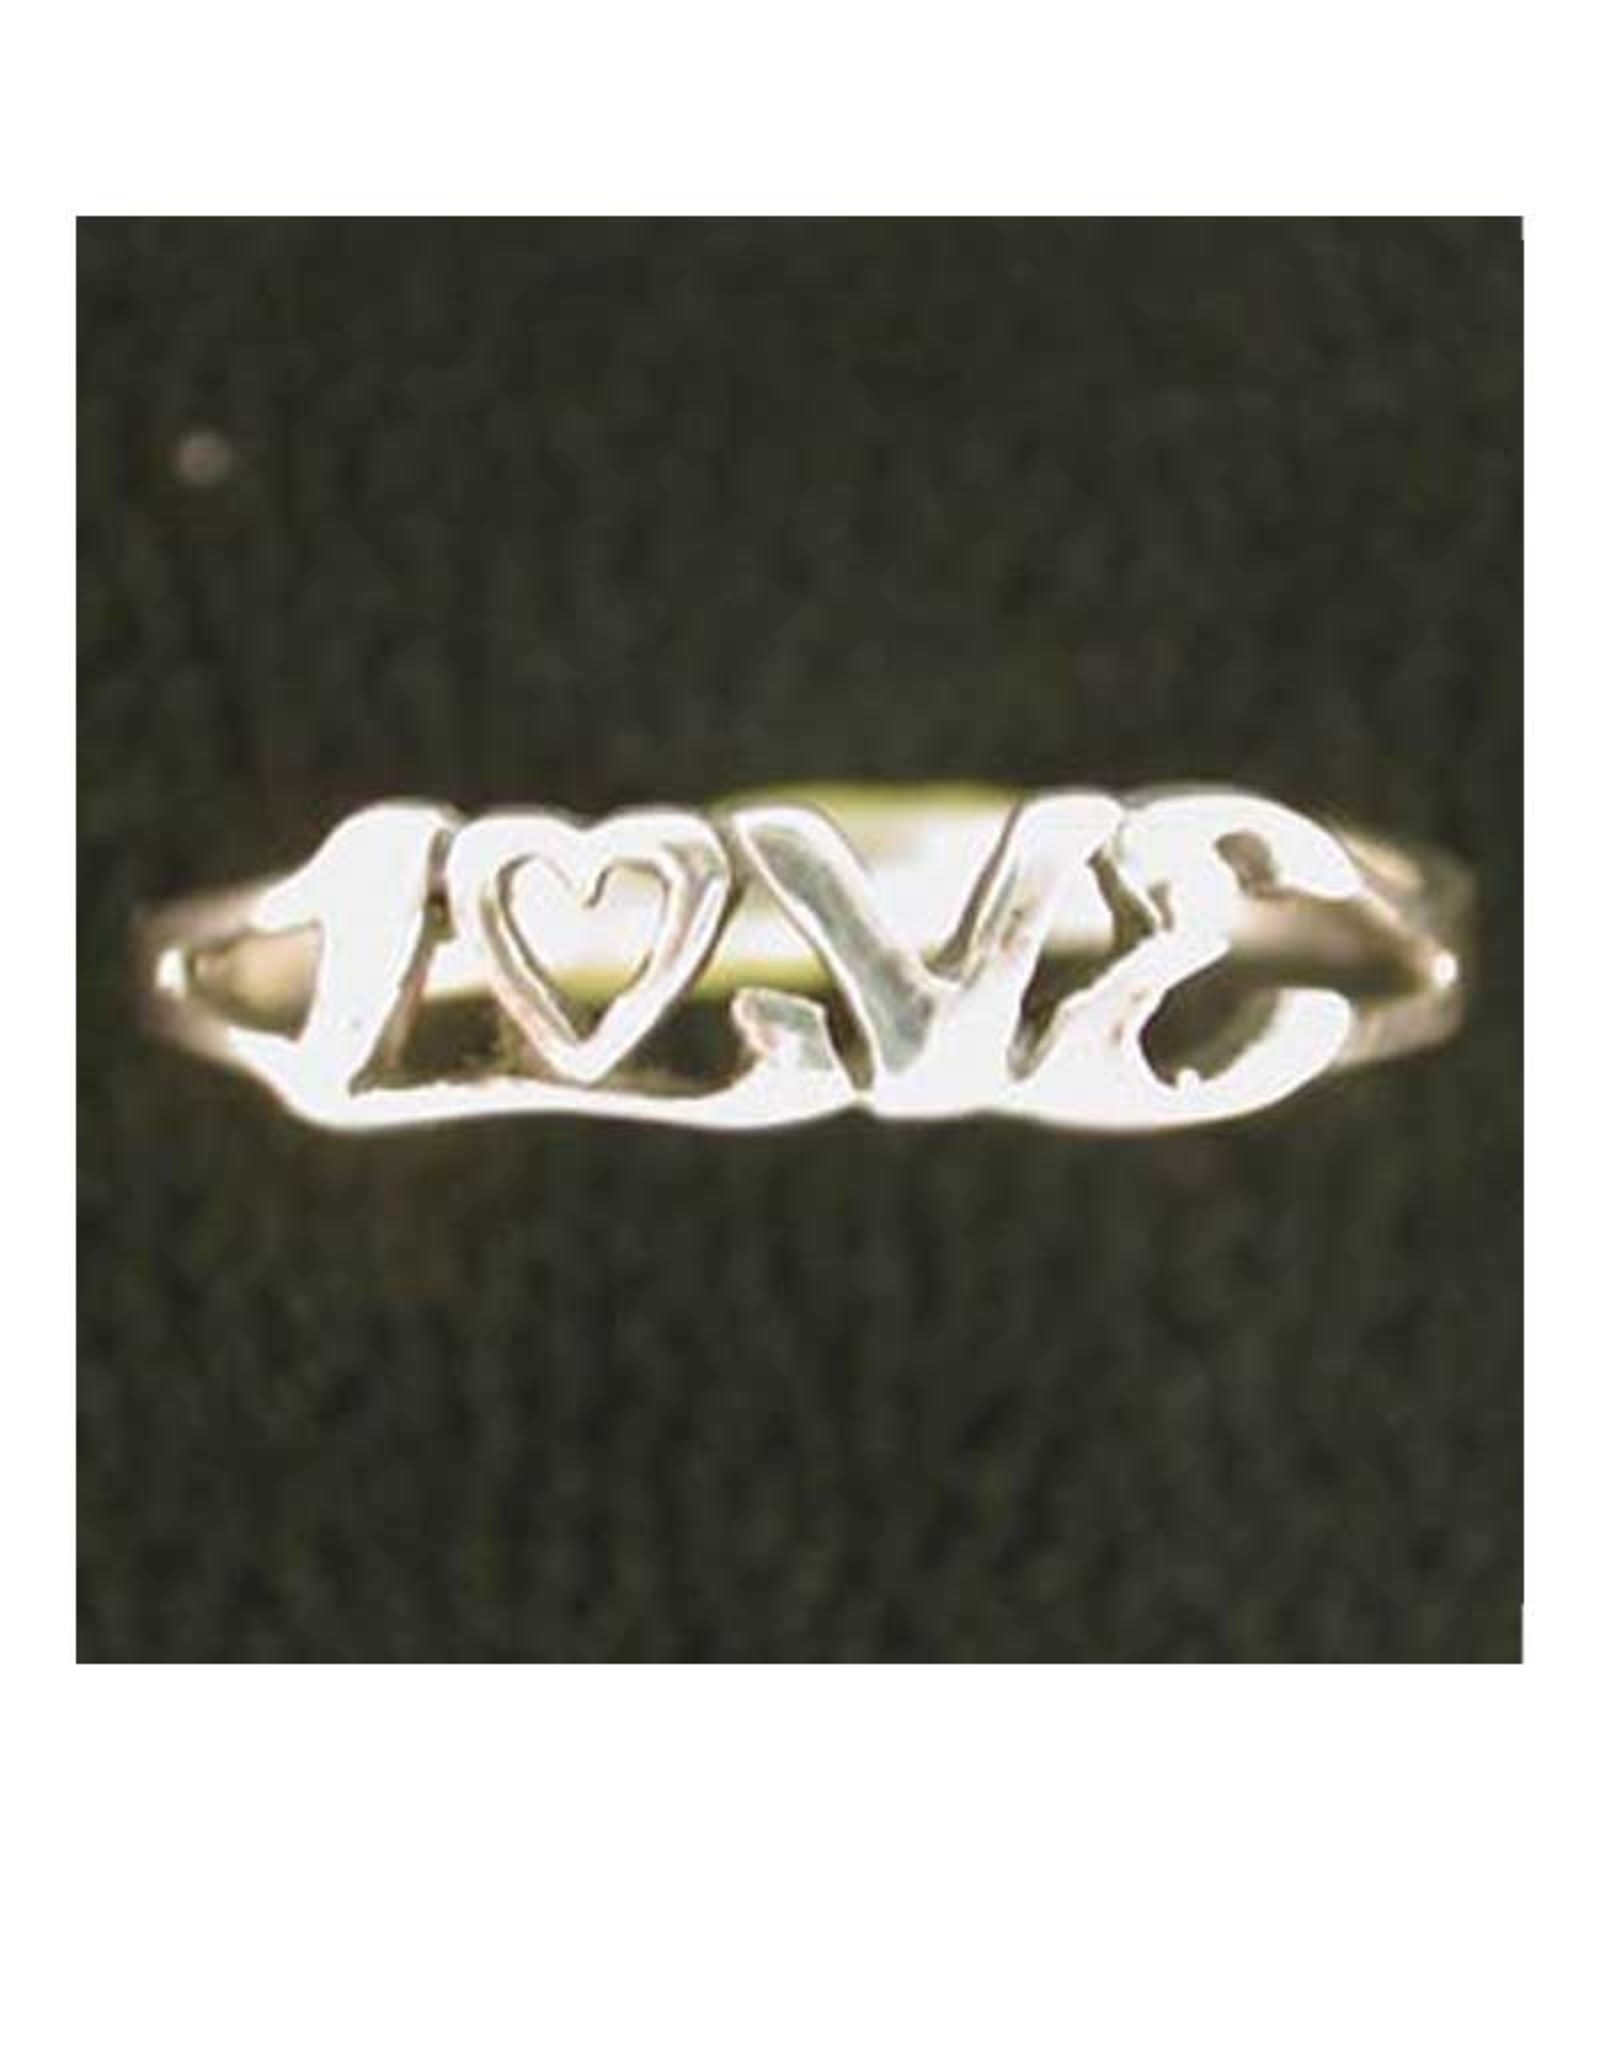 Love Ring Sterling Silver - Size 4